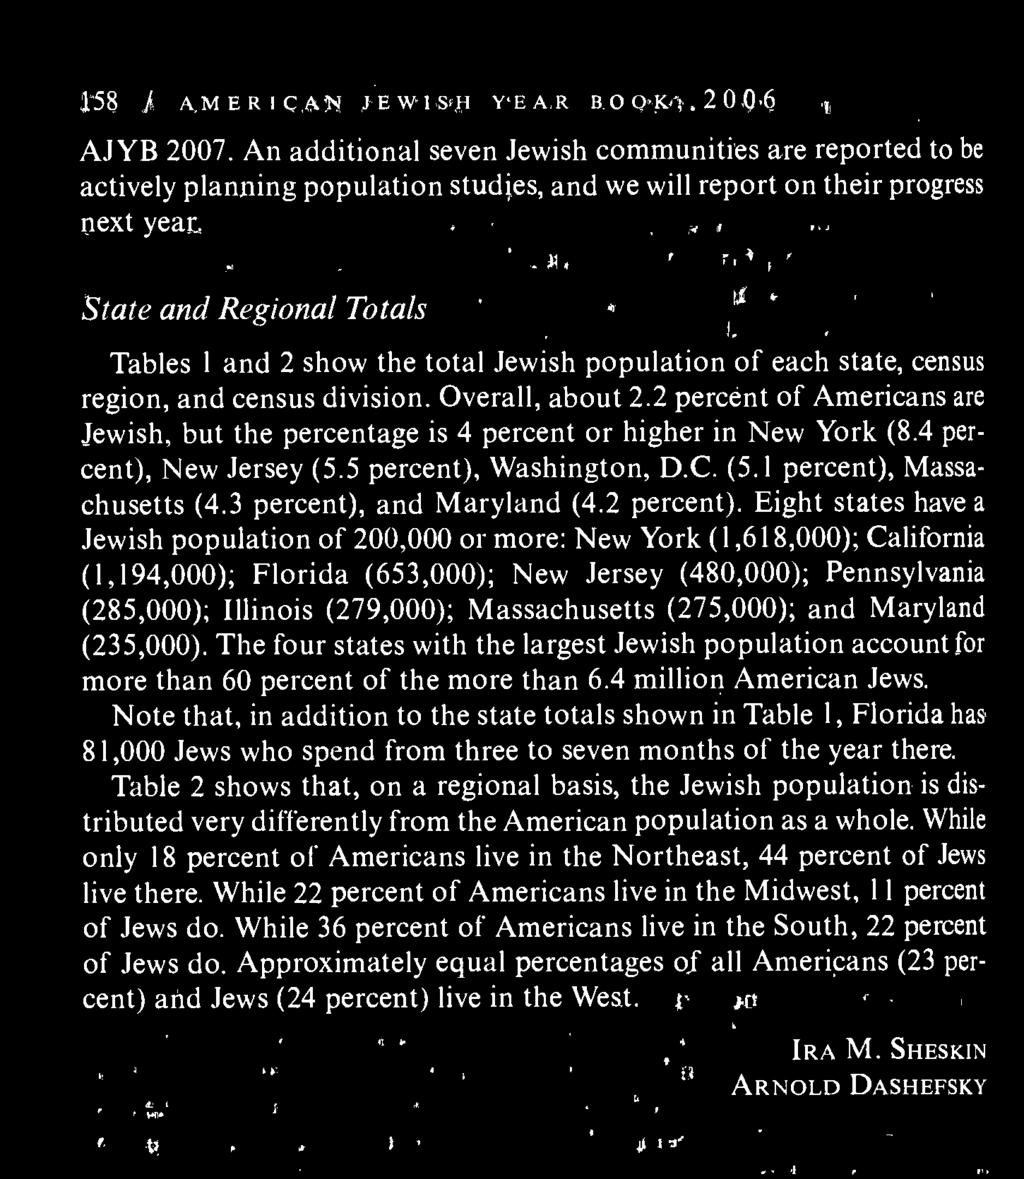 Eight states Jewish population of 200,000 or more: New York (1,618,000); Cali (1,194,000); Florida (653,000); New Jersey (480,000); Pennsy (285,000); Illinois (279,000); Massachusetts (275,000); and